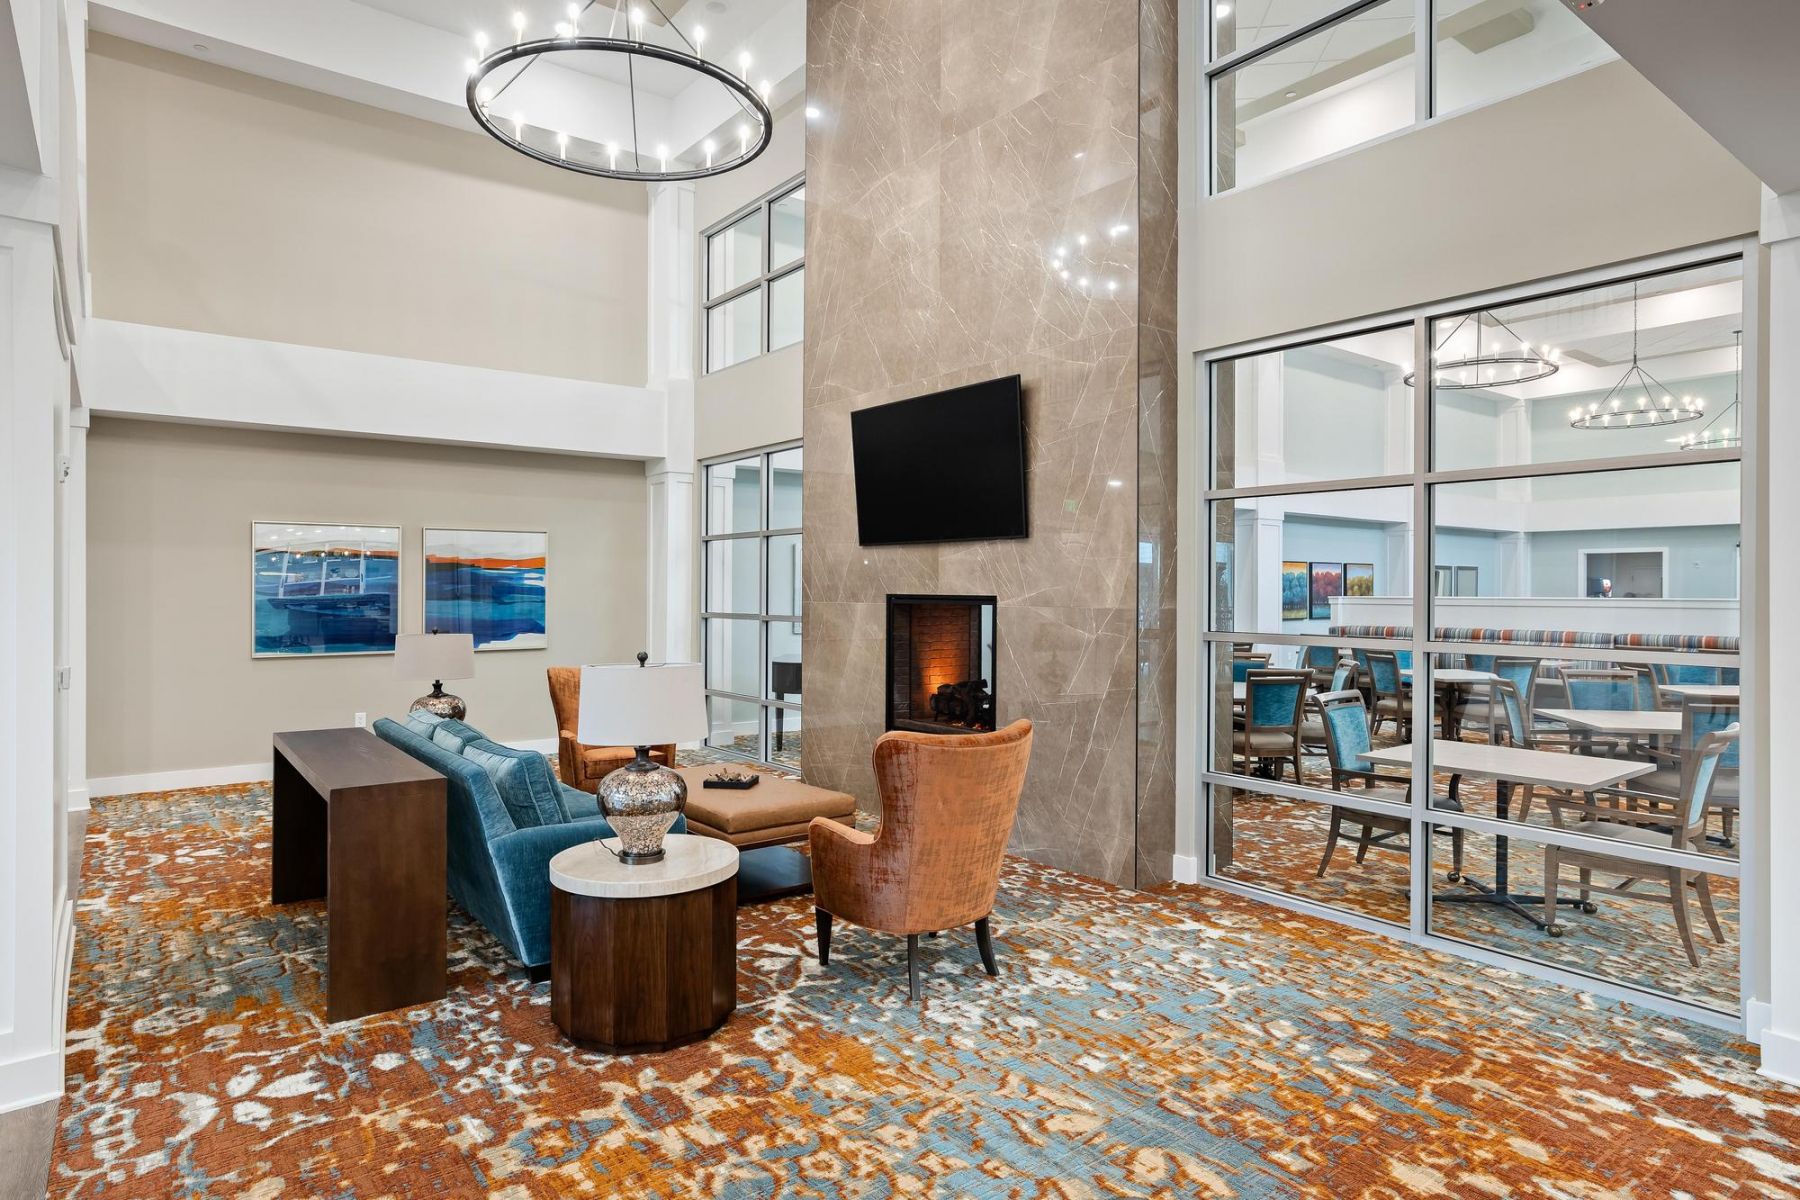 The Claiborne at Brickyard Crossing senior community lounge area with fireplace and tv